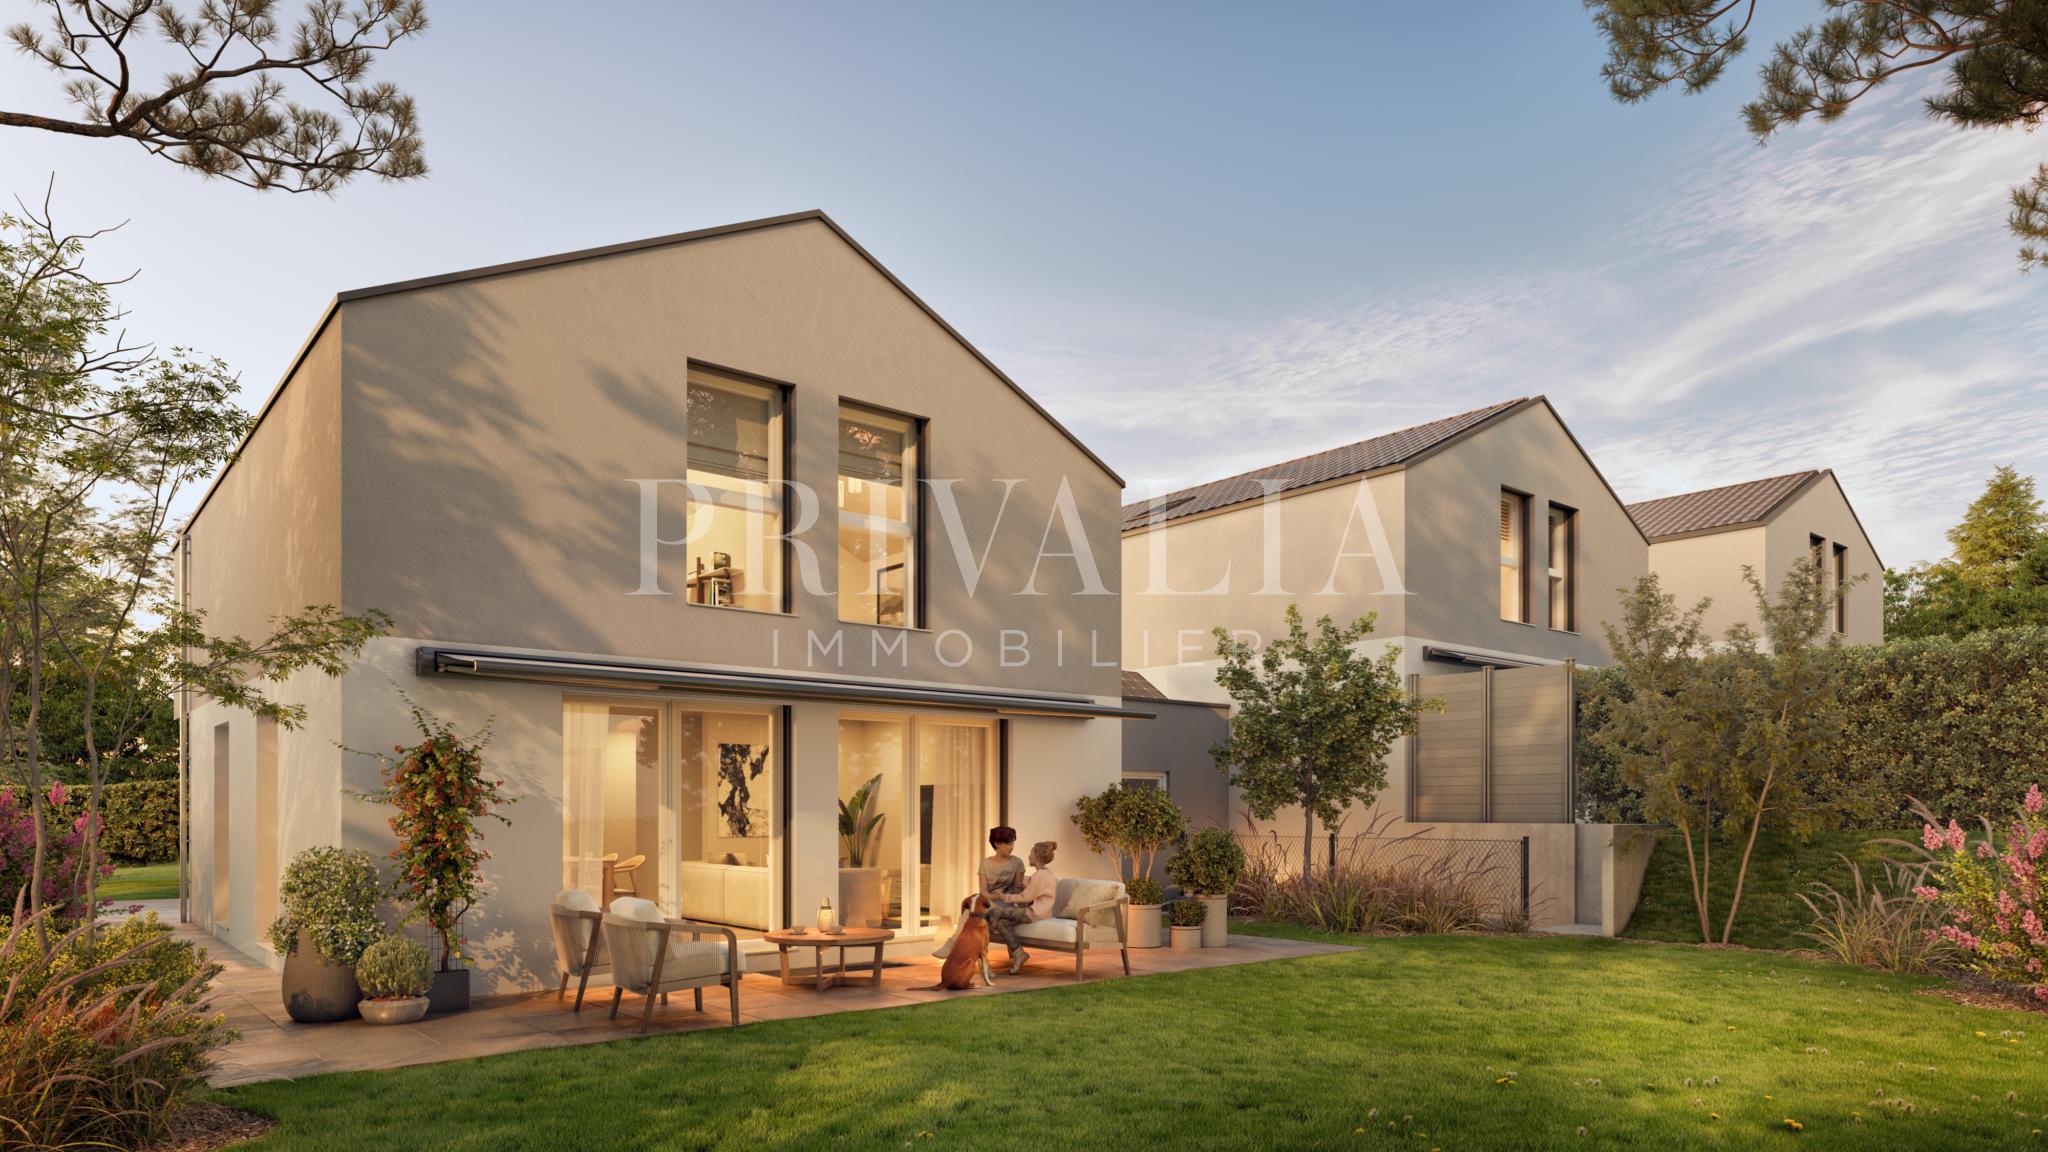 PrivaliaPreview: New development of 3 low-energy villas close to the International Organisations